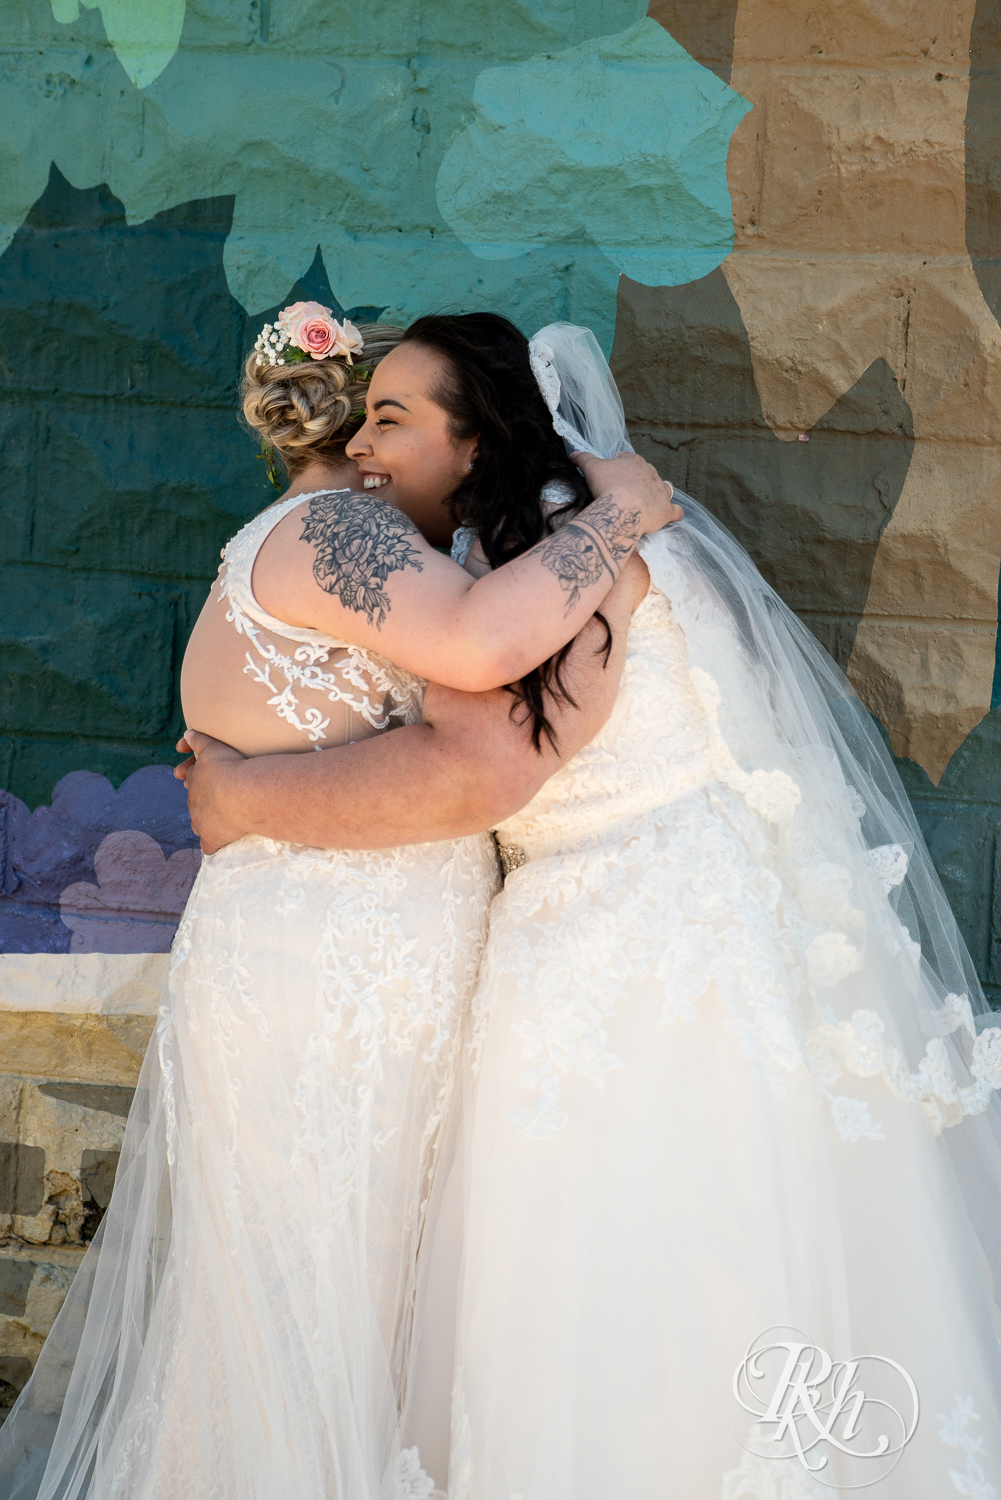 Lesbian brides share first look at Cannon River Winery in Cannon Falls, Minnesota.